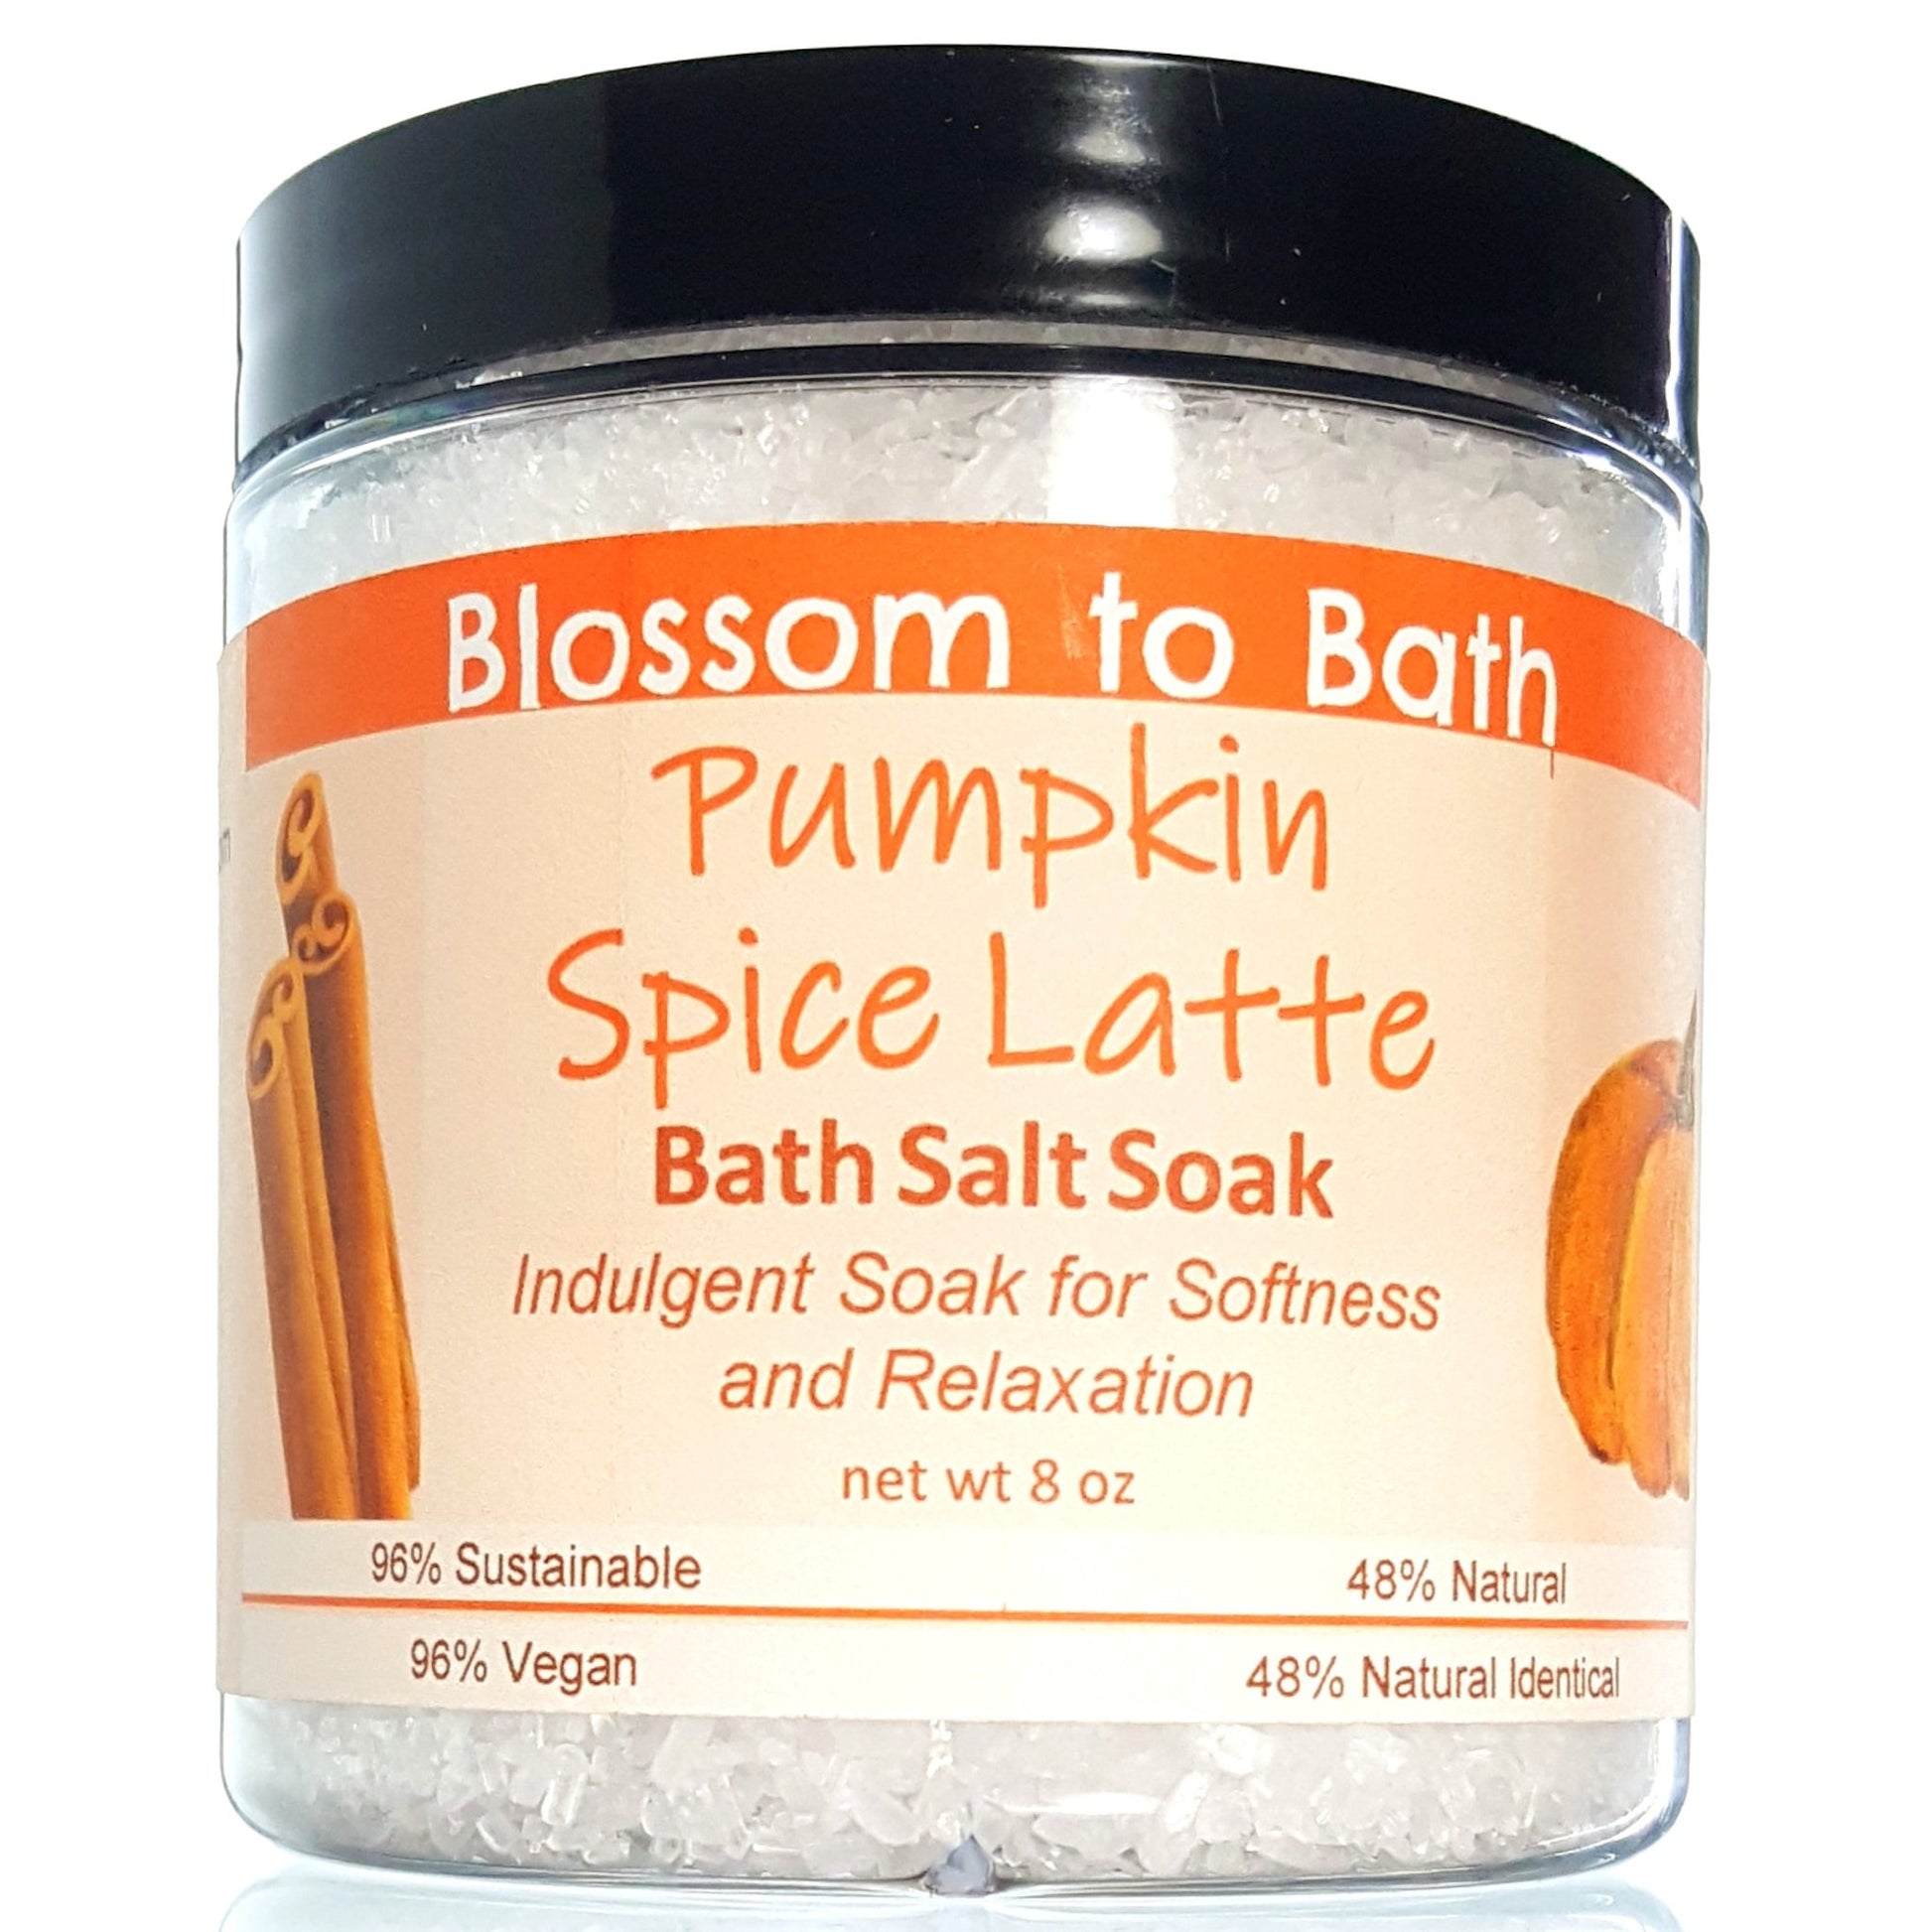 Buy Blossom to Bath Pumpkin Spice Latte Bath Salt Soak from Flowersong Soap Studio.  Scented epsom salts for a luxurious soaking experience  Deep vanilla and lightly fruited spice blend seamlessly with rich coffee.